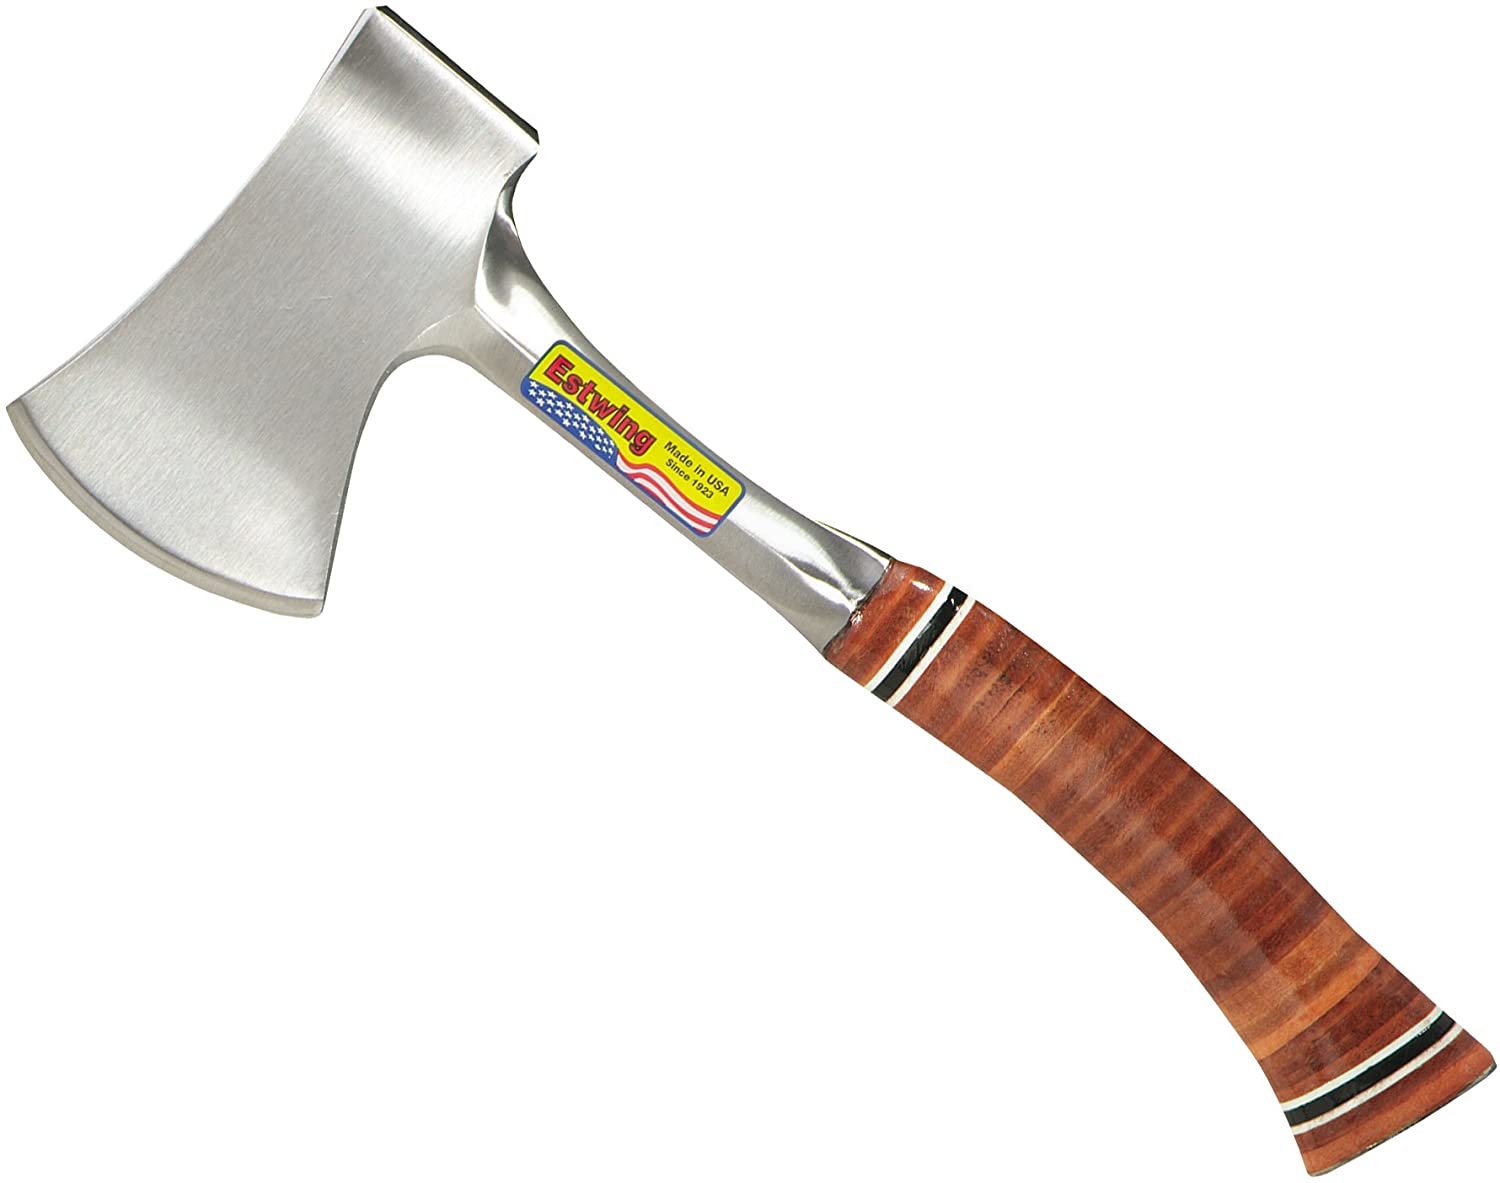 Estwing Sportsman's Axe - 12in Camping Hatchet with Forged Steel Construction